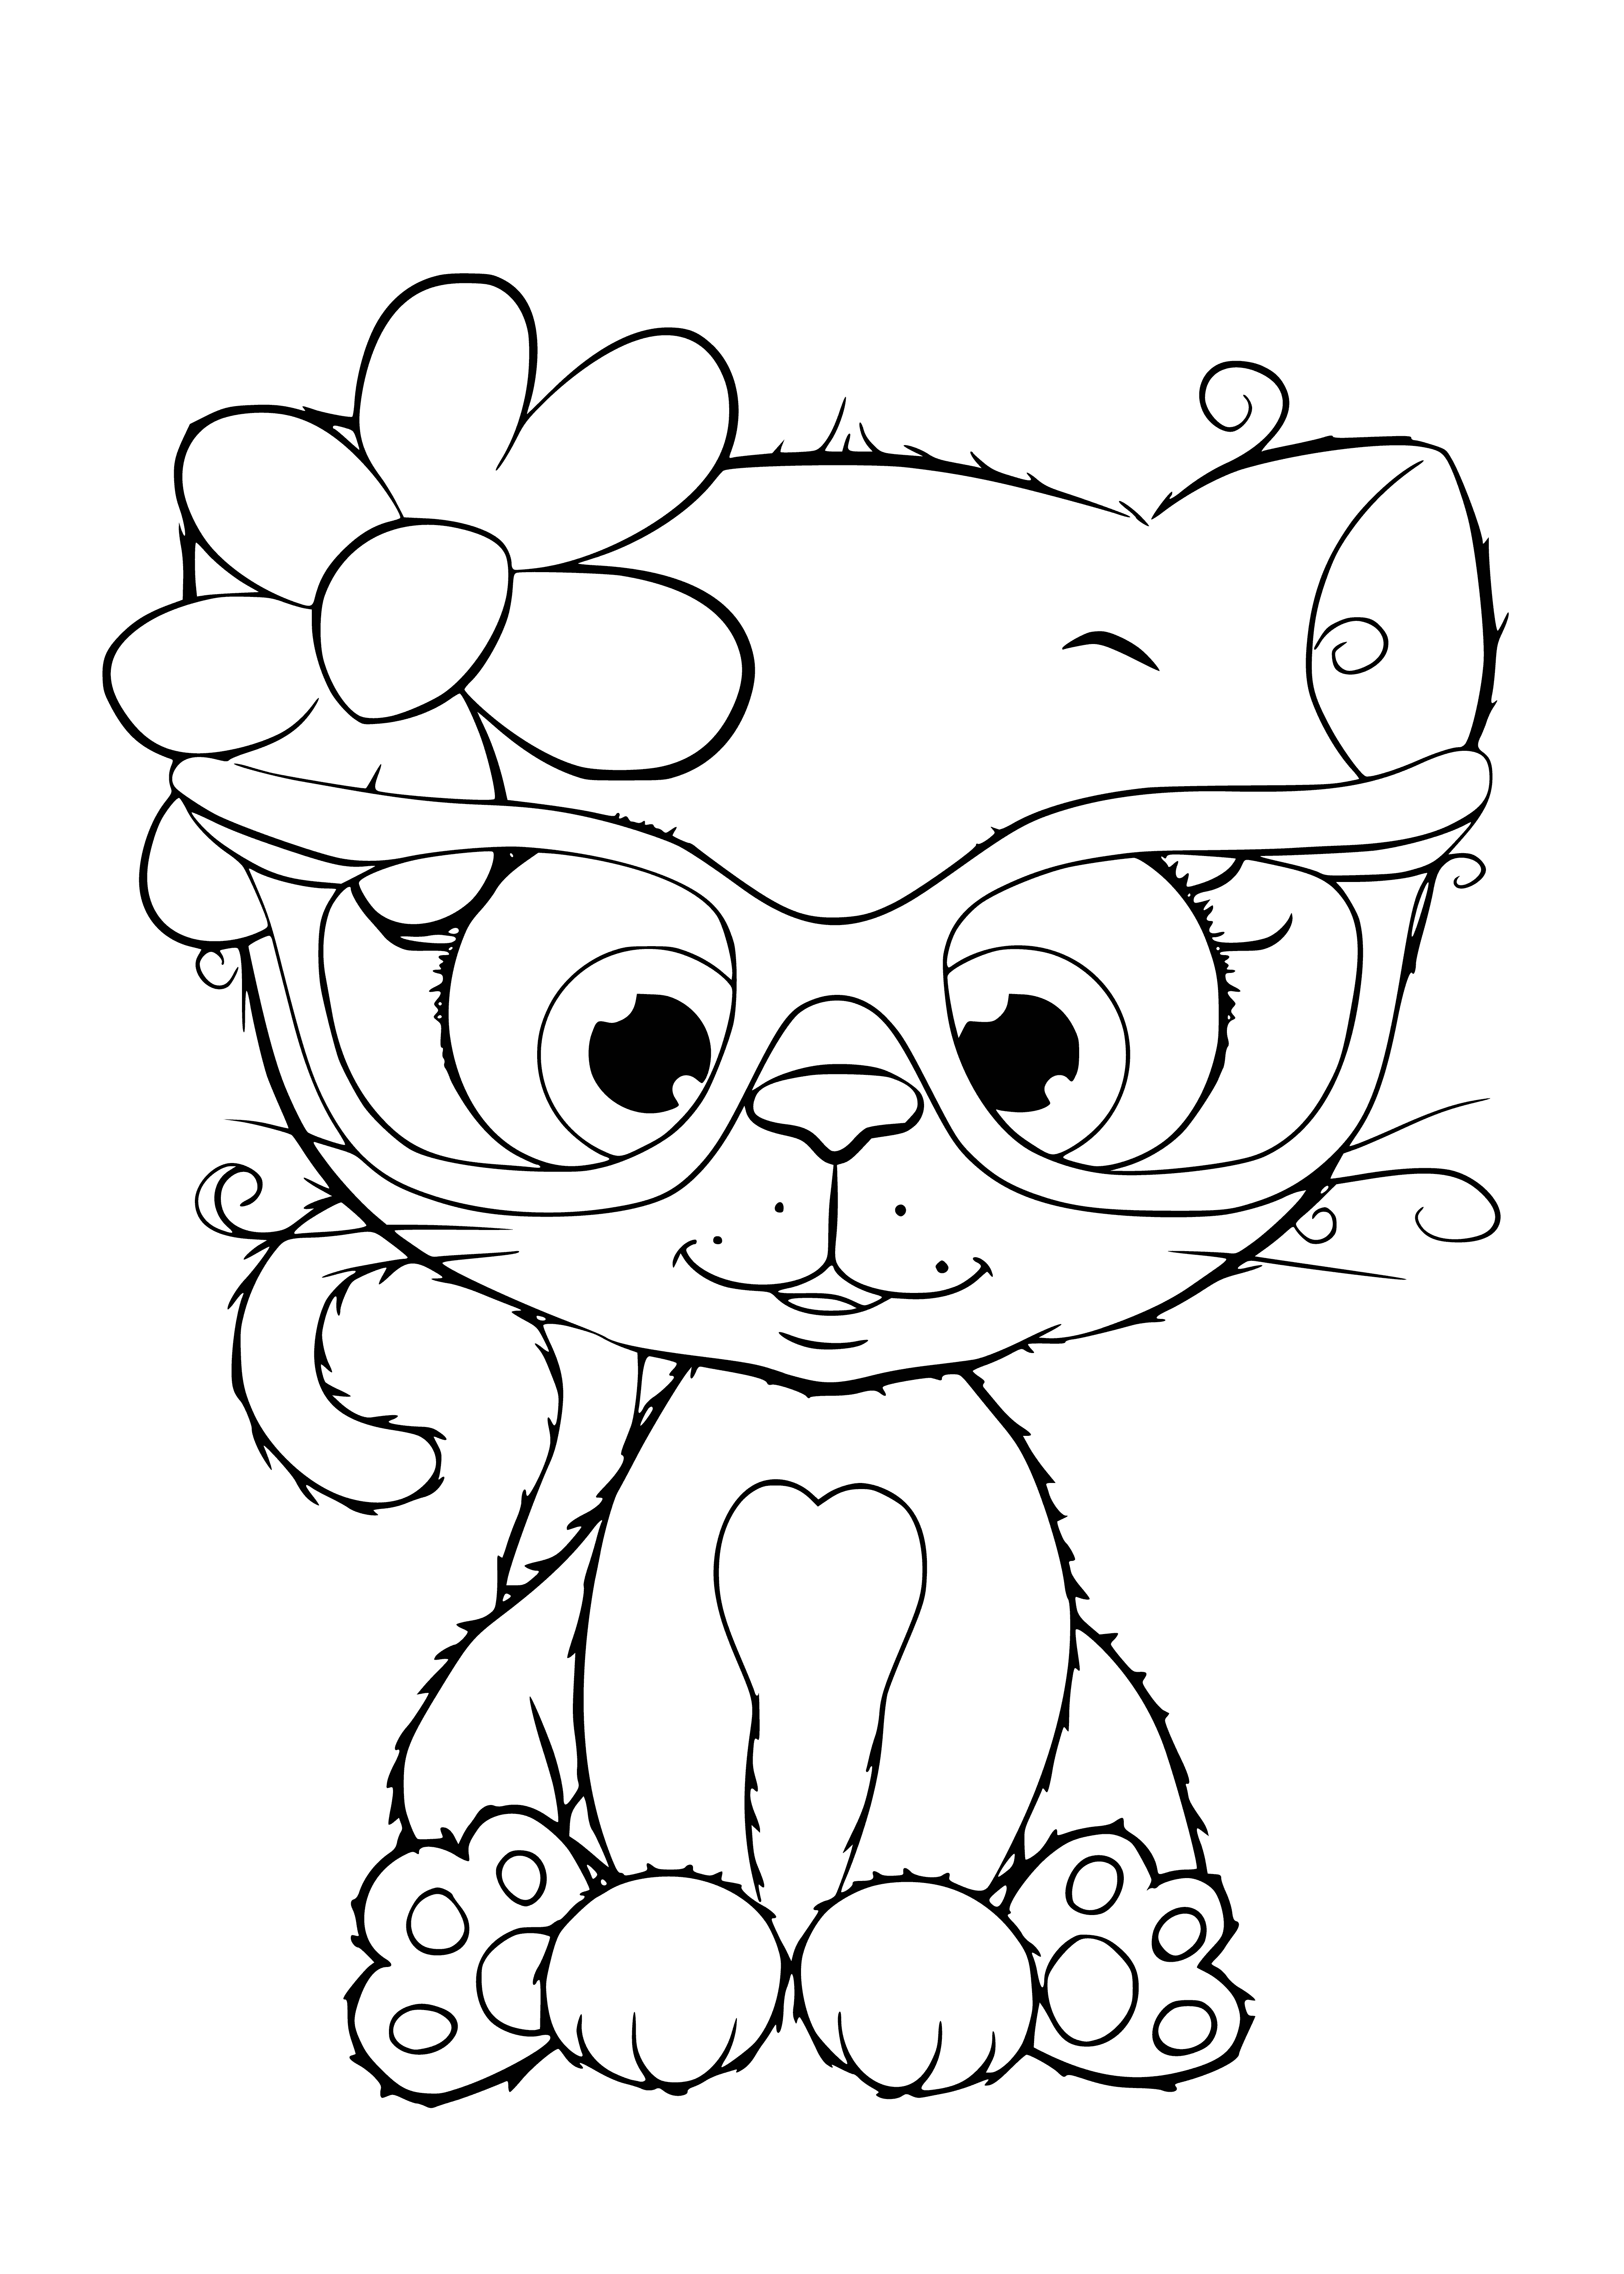 coloring page: Cute kitty sleeping on a cloud surrounded by stars and hearts. A peaceful and calming coloring page to enjoy! #kawaii #coloring #peaceful